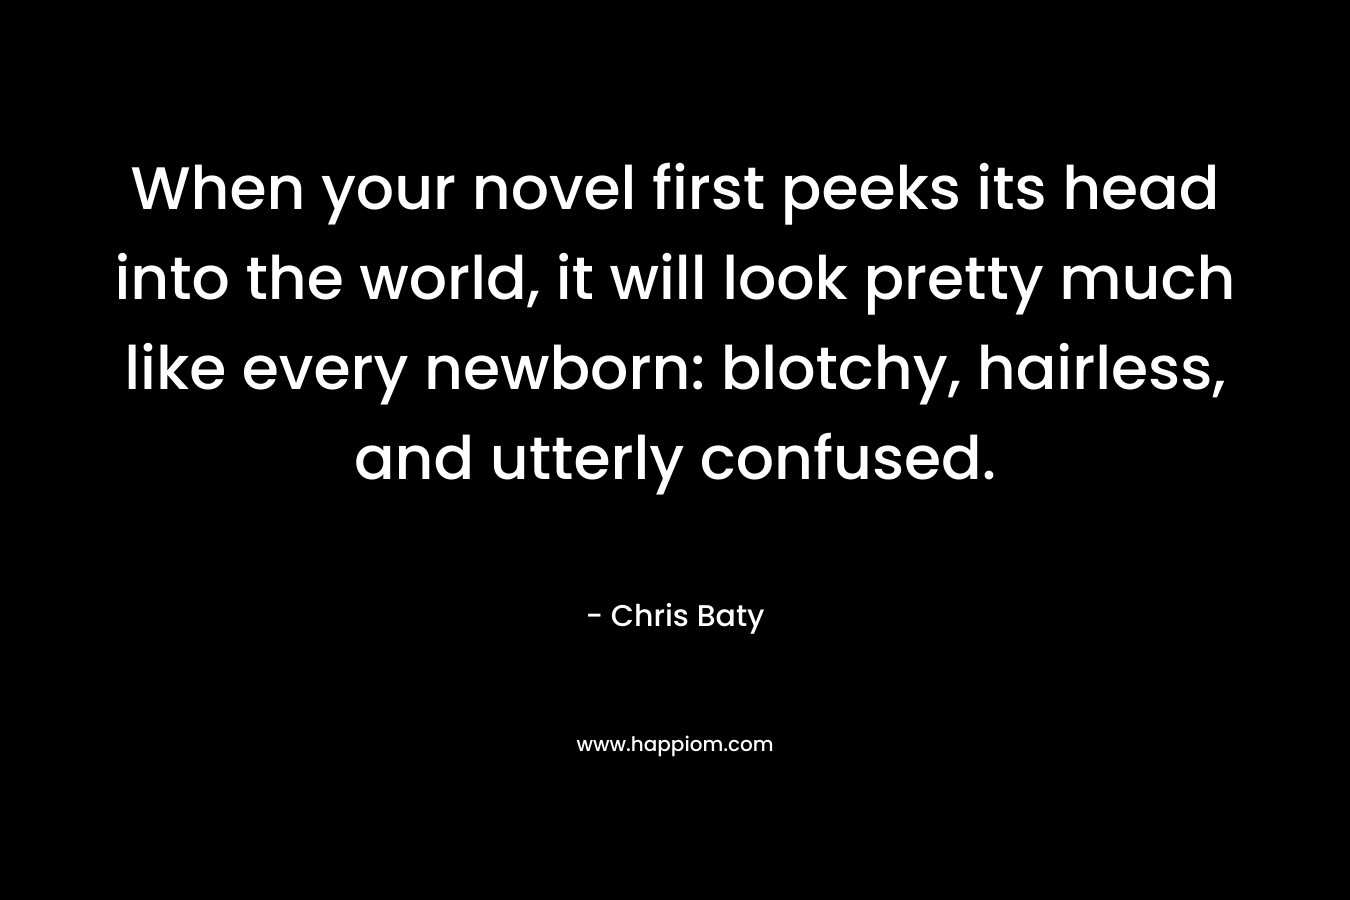 When your novel first peeks its head into the world, it will look pretty much like every newborn: blotchy, hairless, and utterly confused. – Chris Baty